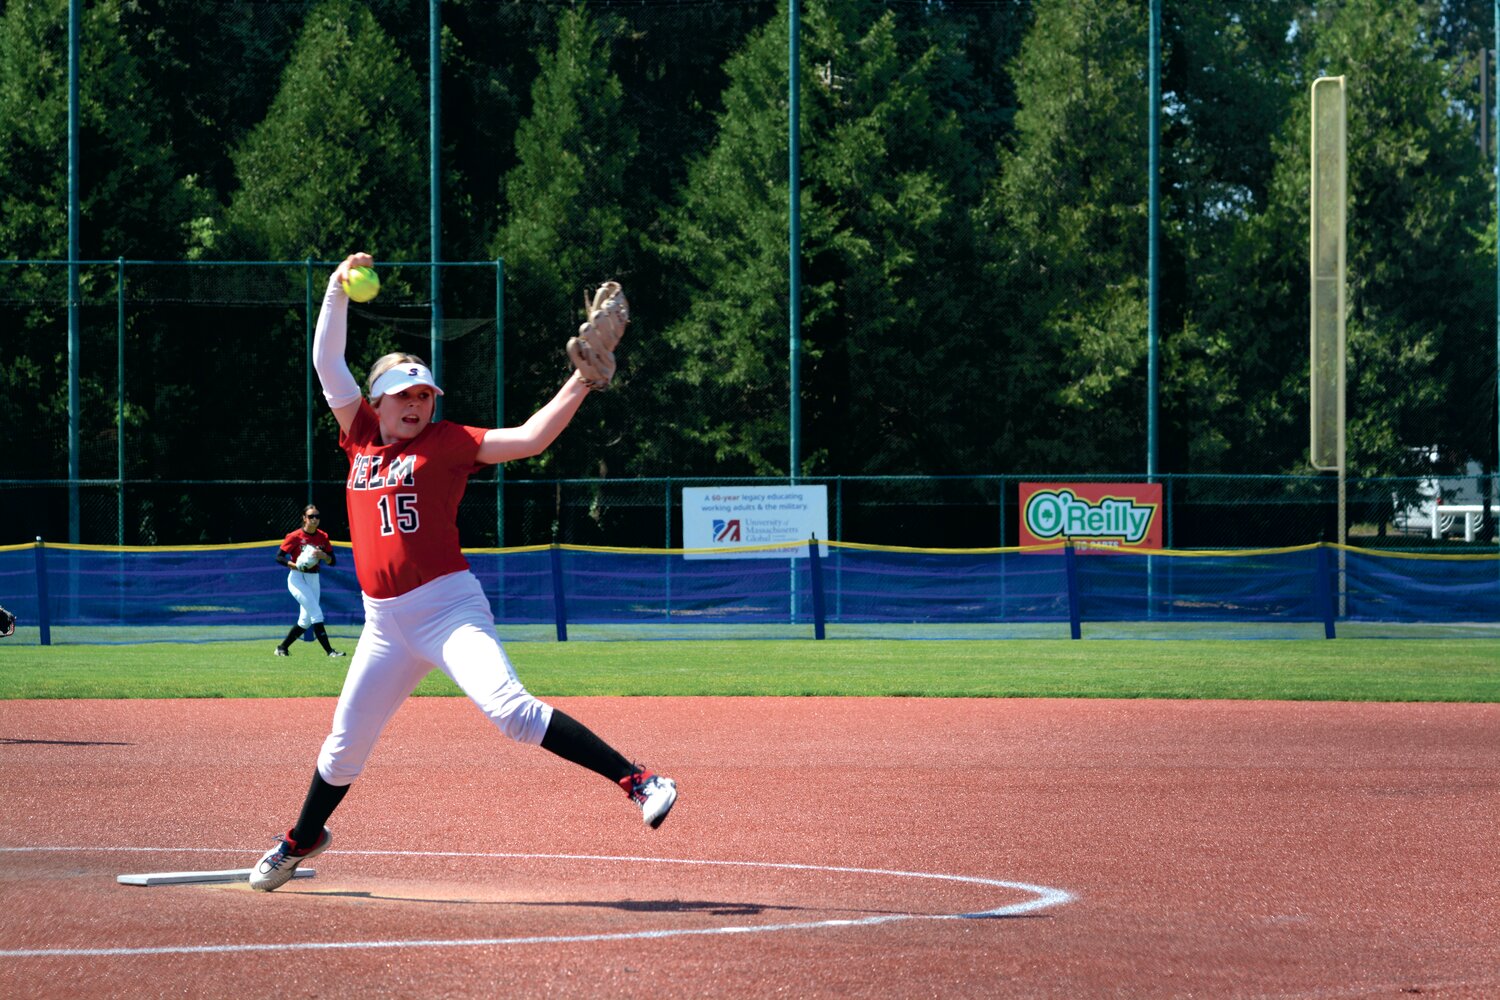 Mallory Hoke delivers a pitch against Juanita High School in the 3A state fastpitch tournament on May 25.